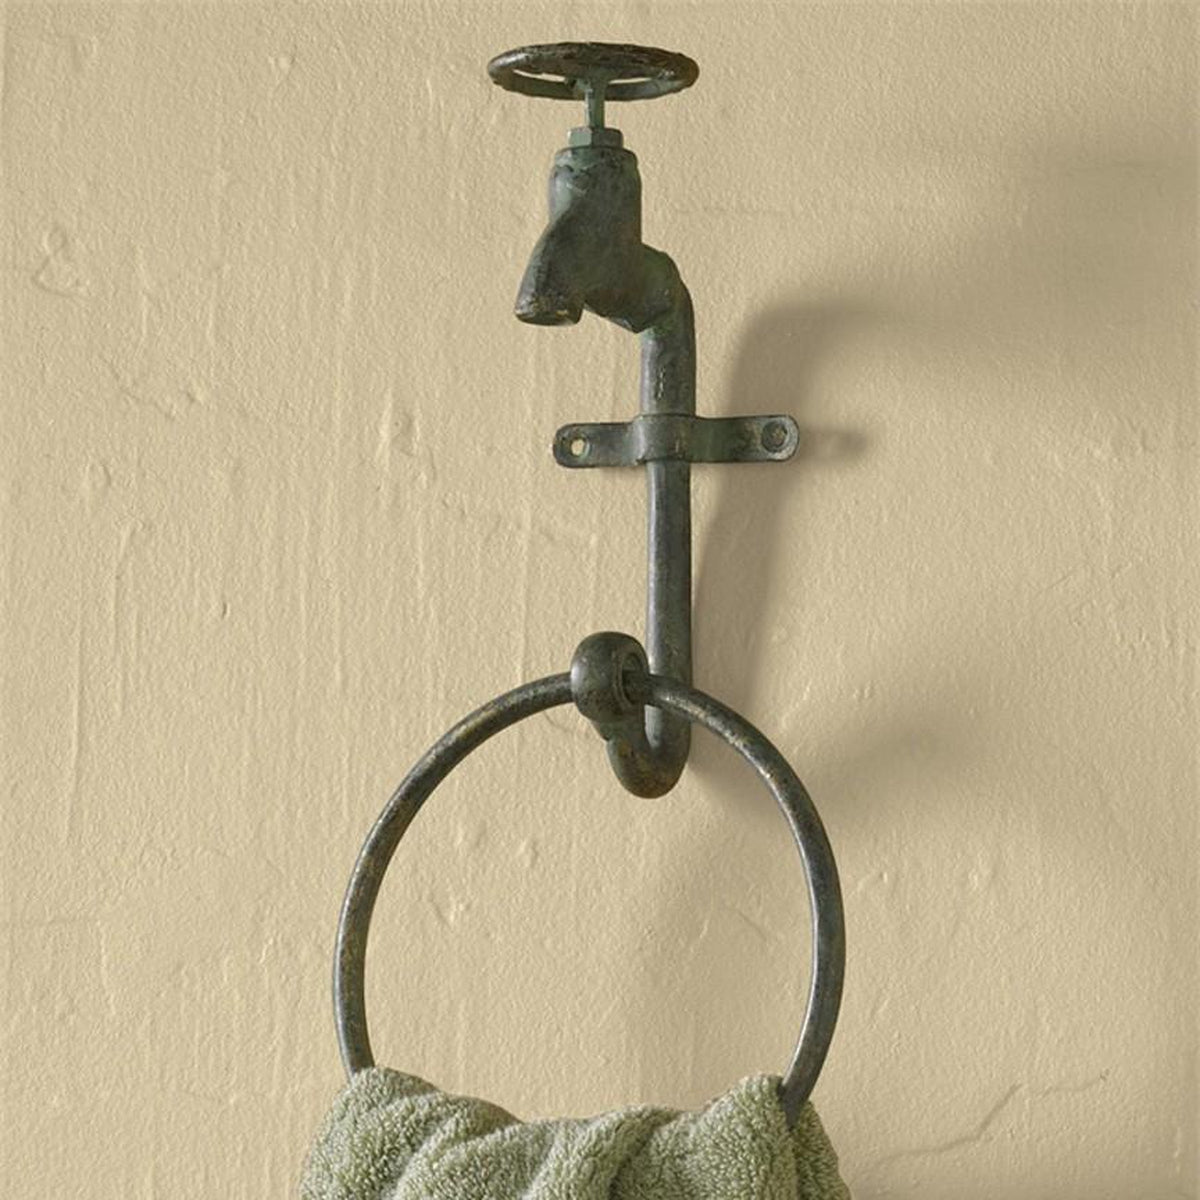 Water Faucet Ring Hook-Iron Accents